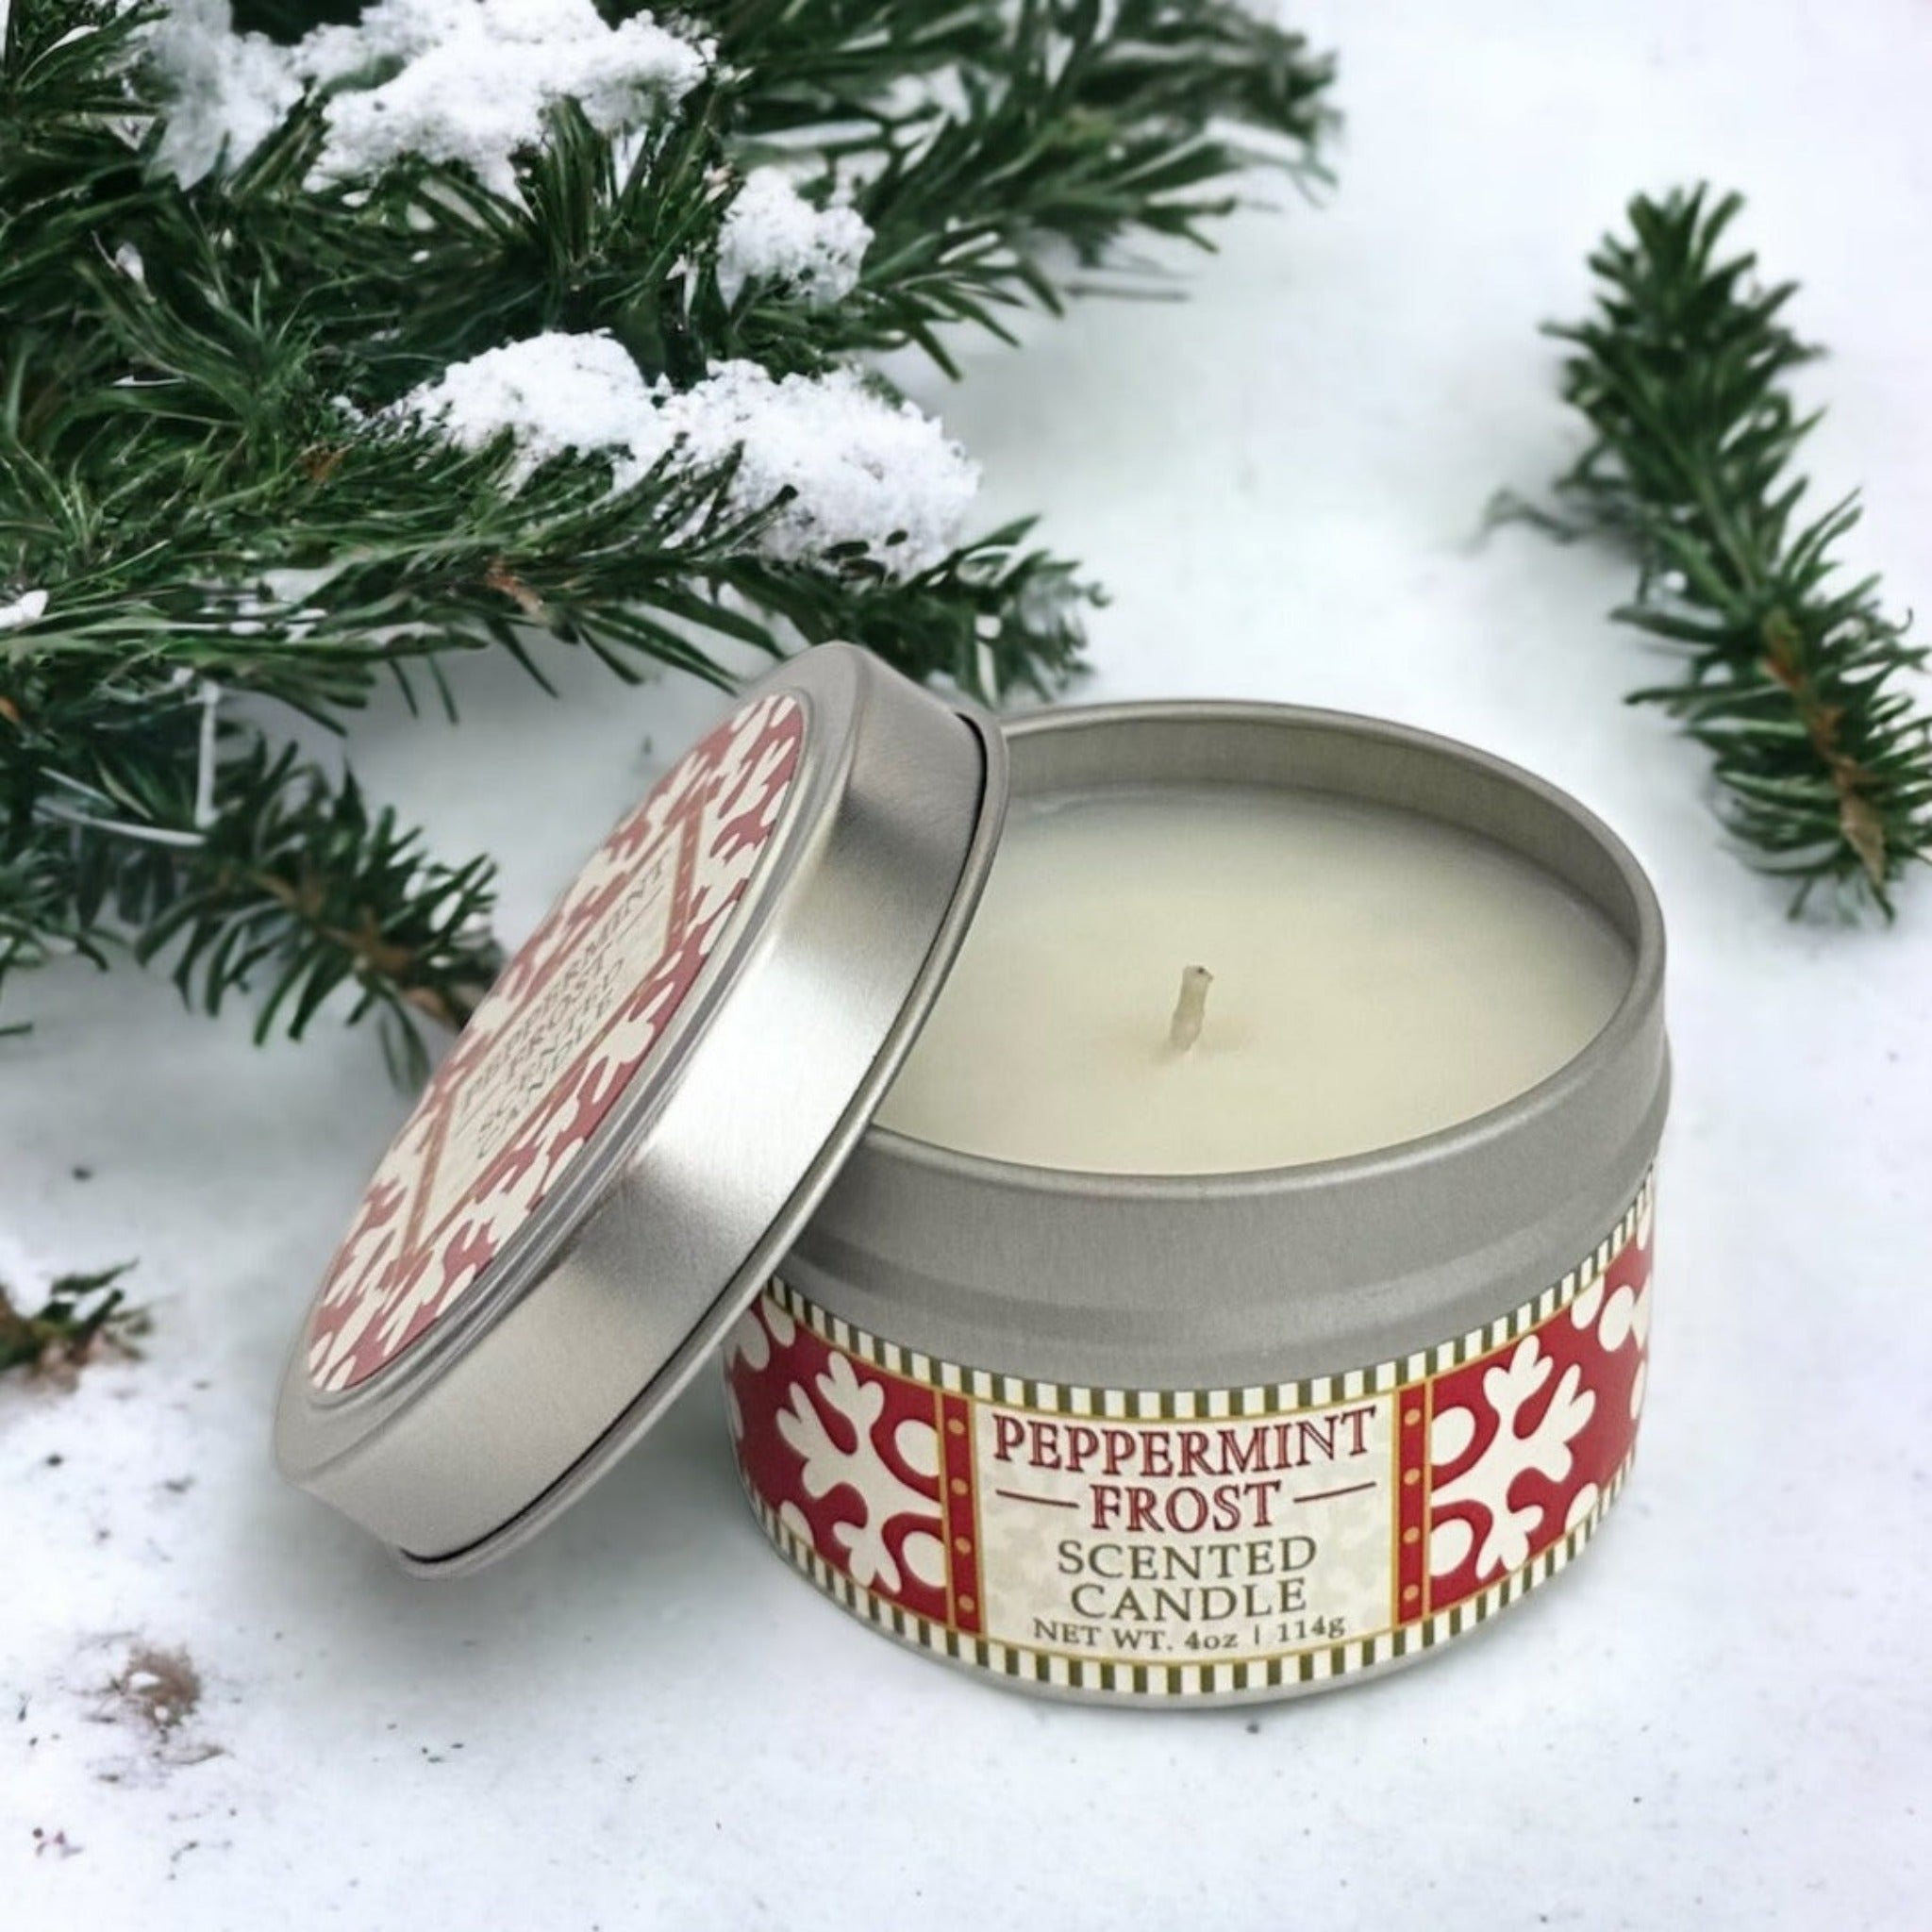 Greenwich Bay Trading Company Peppermint Frost Candle